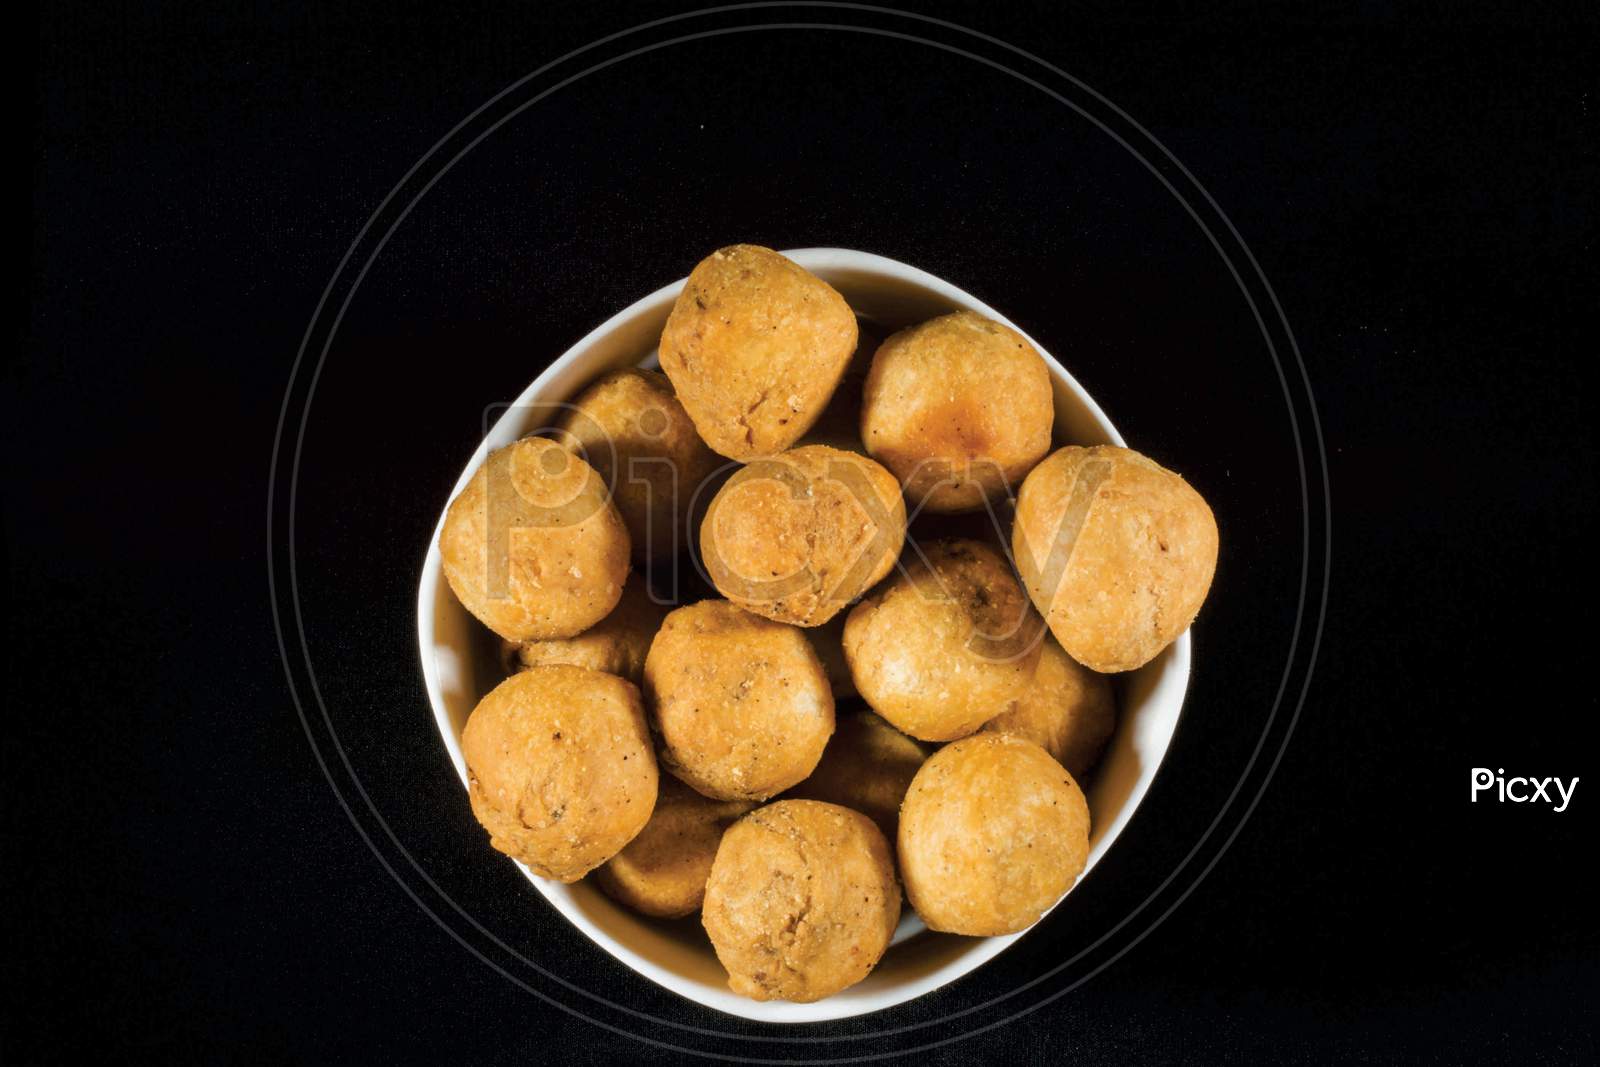 Dry Fruit Kachori Is Small And Round Shape Ball Stuffed With Masala And Cashew.Indian Traditional Dry Fruit Kachori Also Know As Mawa Kachori.Deep-Fried Snack Filled With Dry Fruits & Khoya.